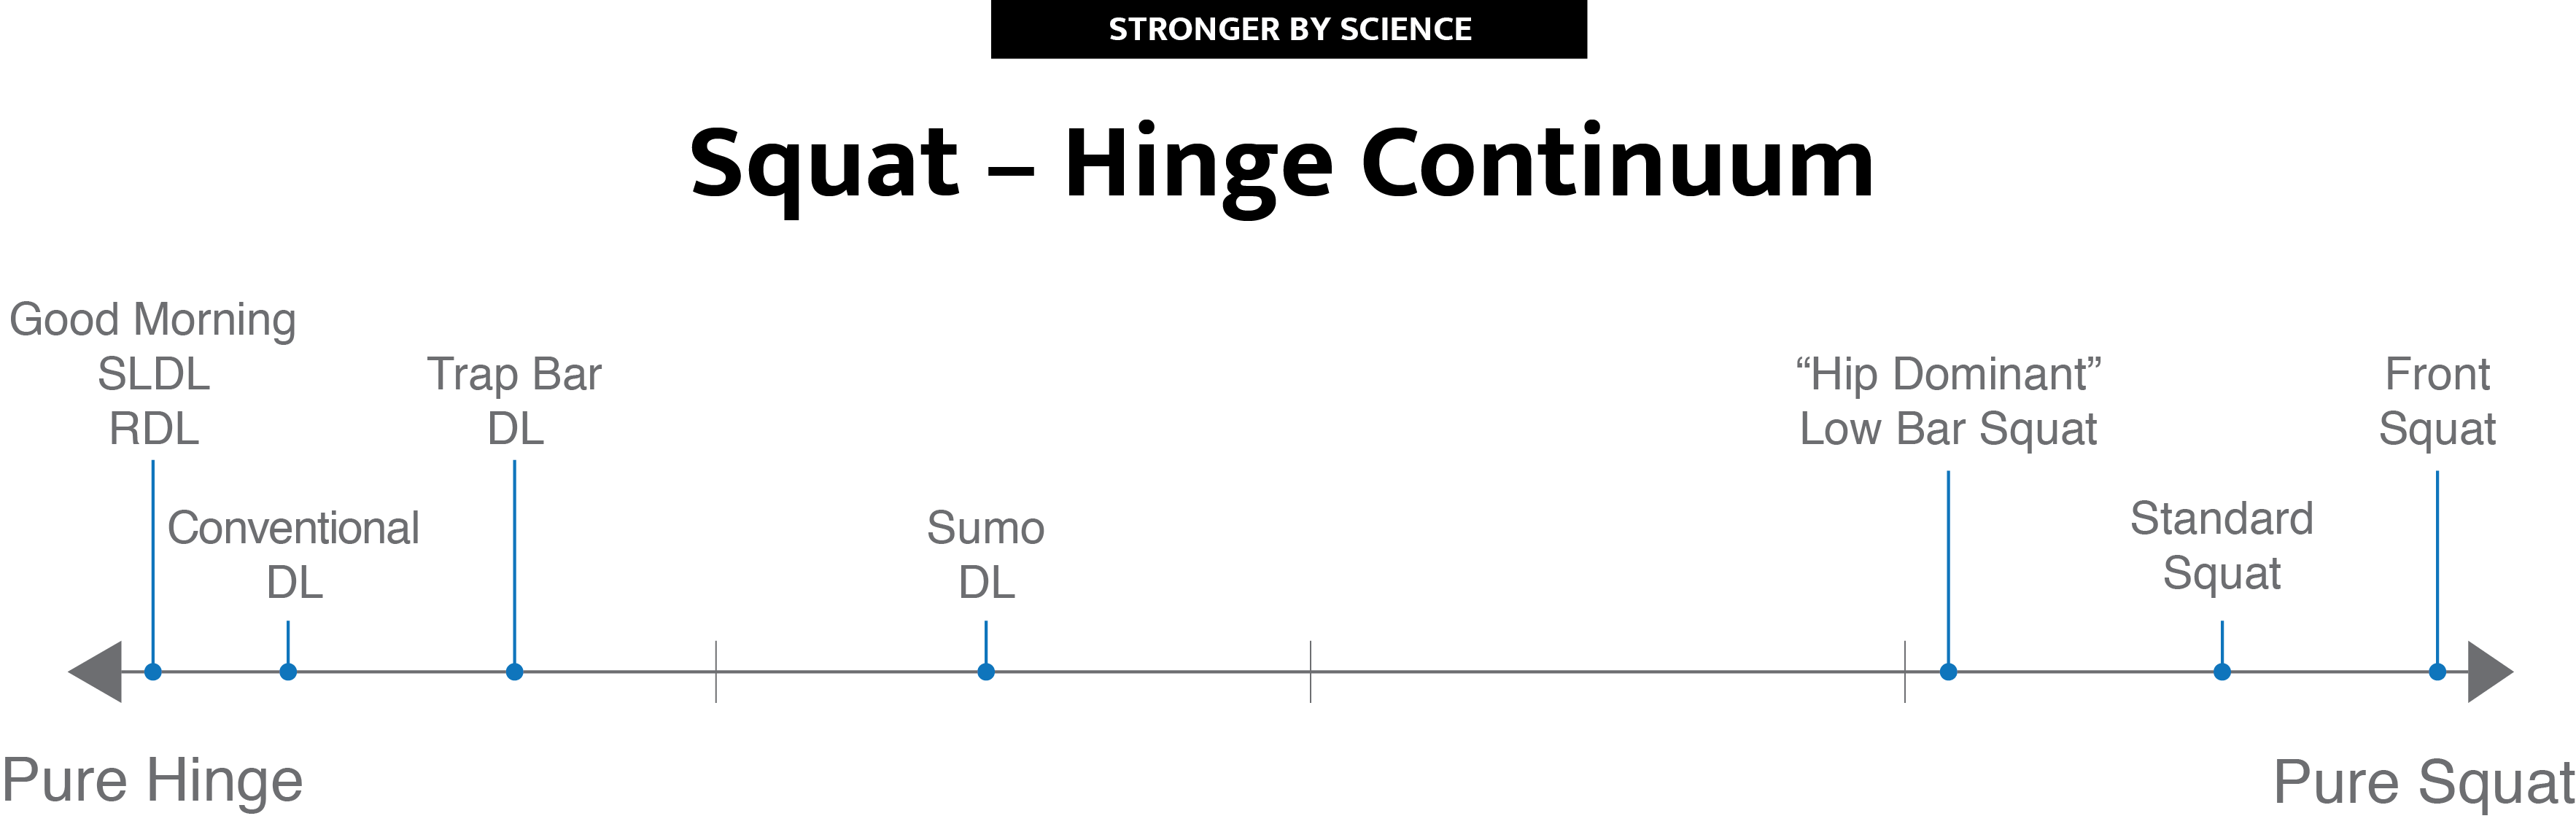 The trap bar deadlift falls closer to pure hinge on the squat-hinge continuum.